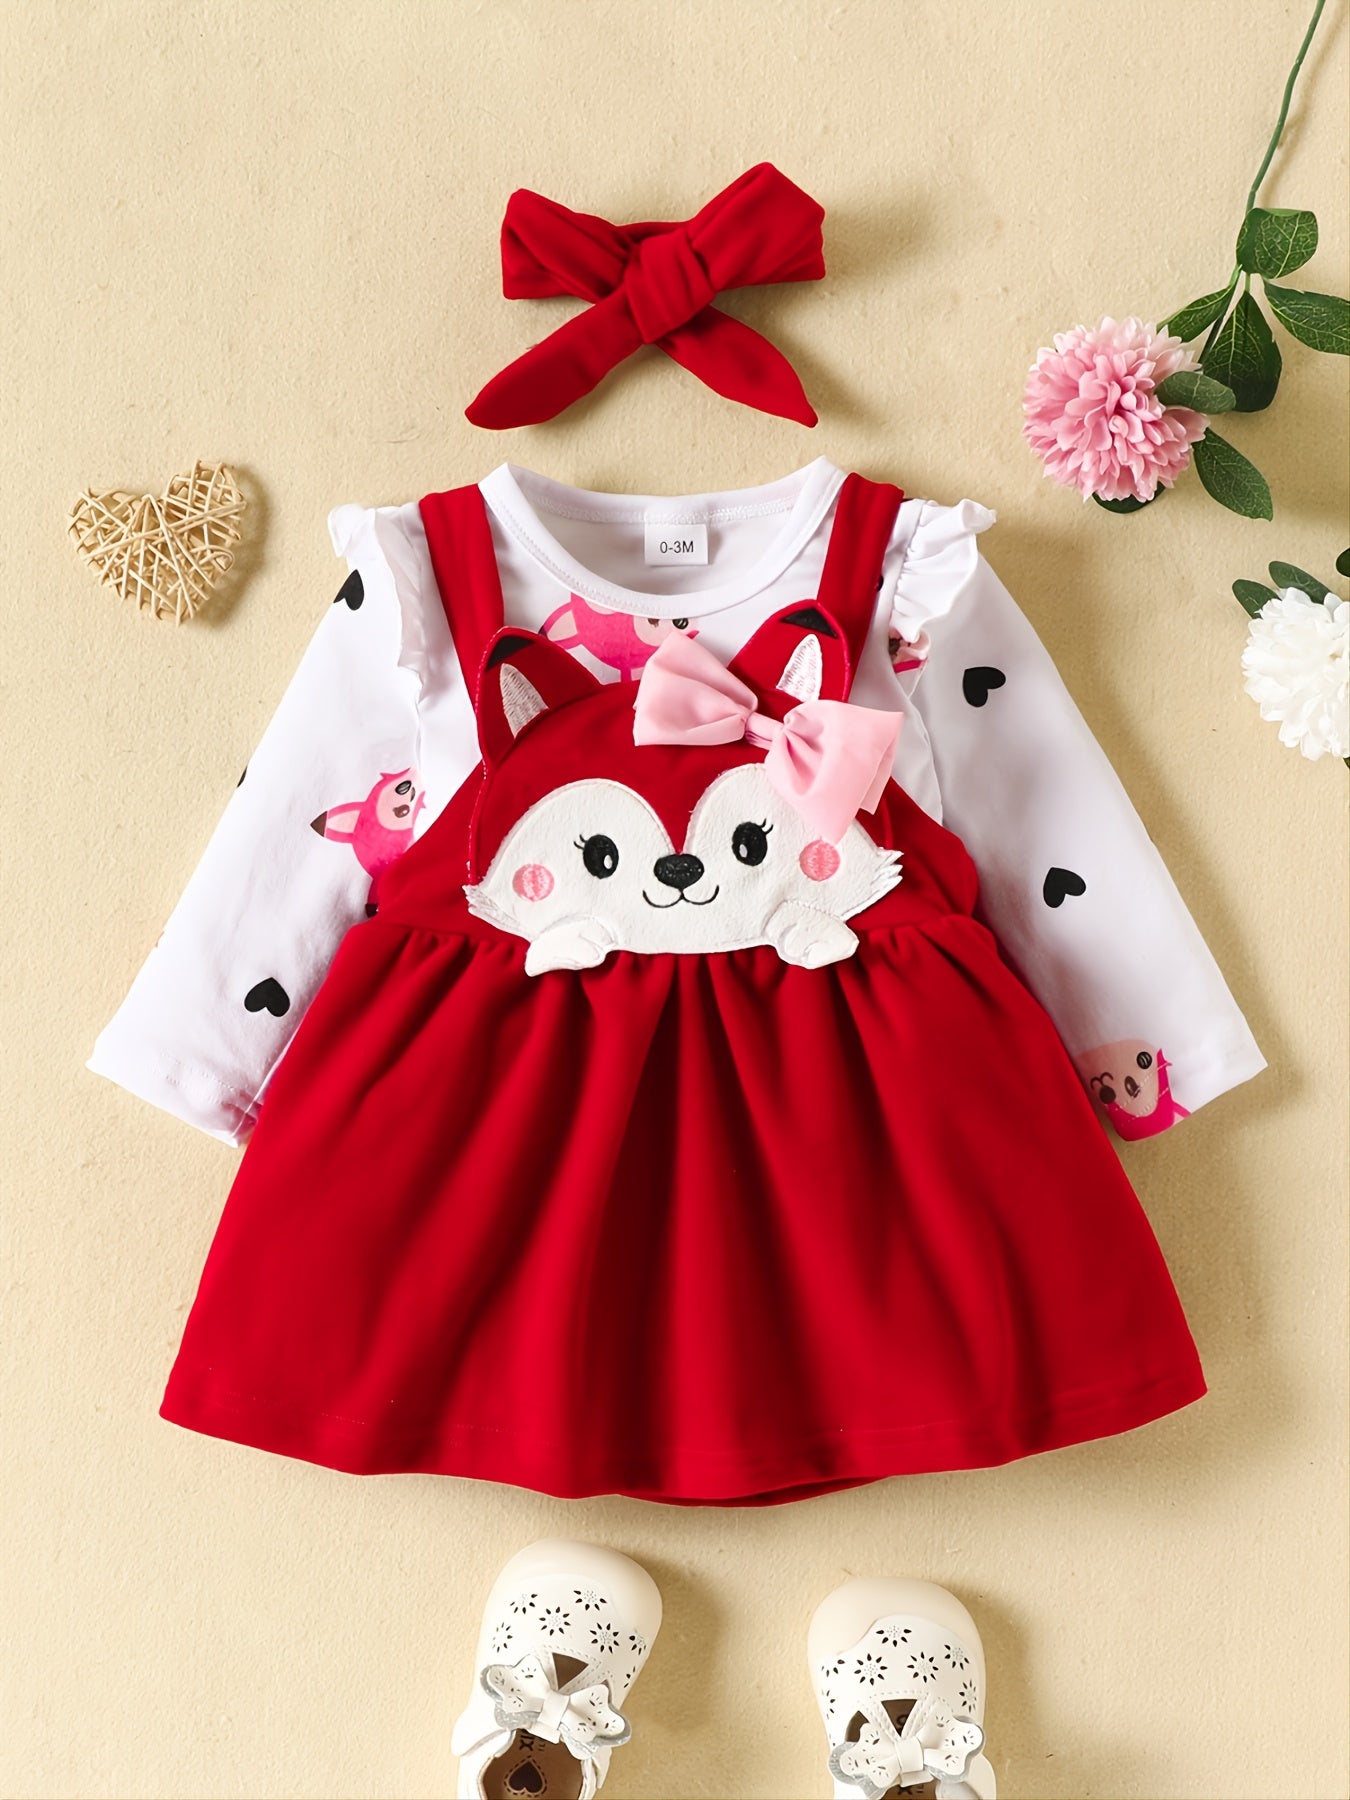 New Baby Girl Cute Fox Pattern Long-sleeved Suspender Skirt Outfit